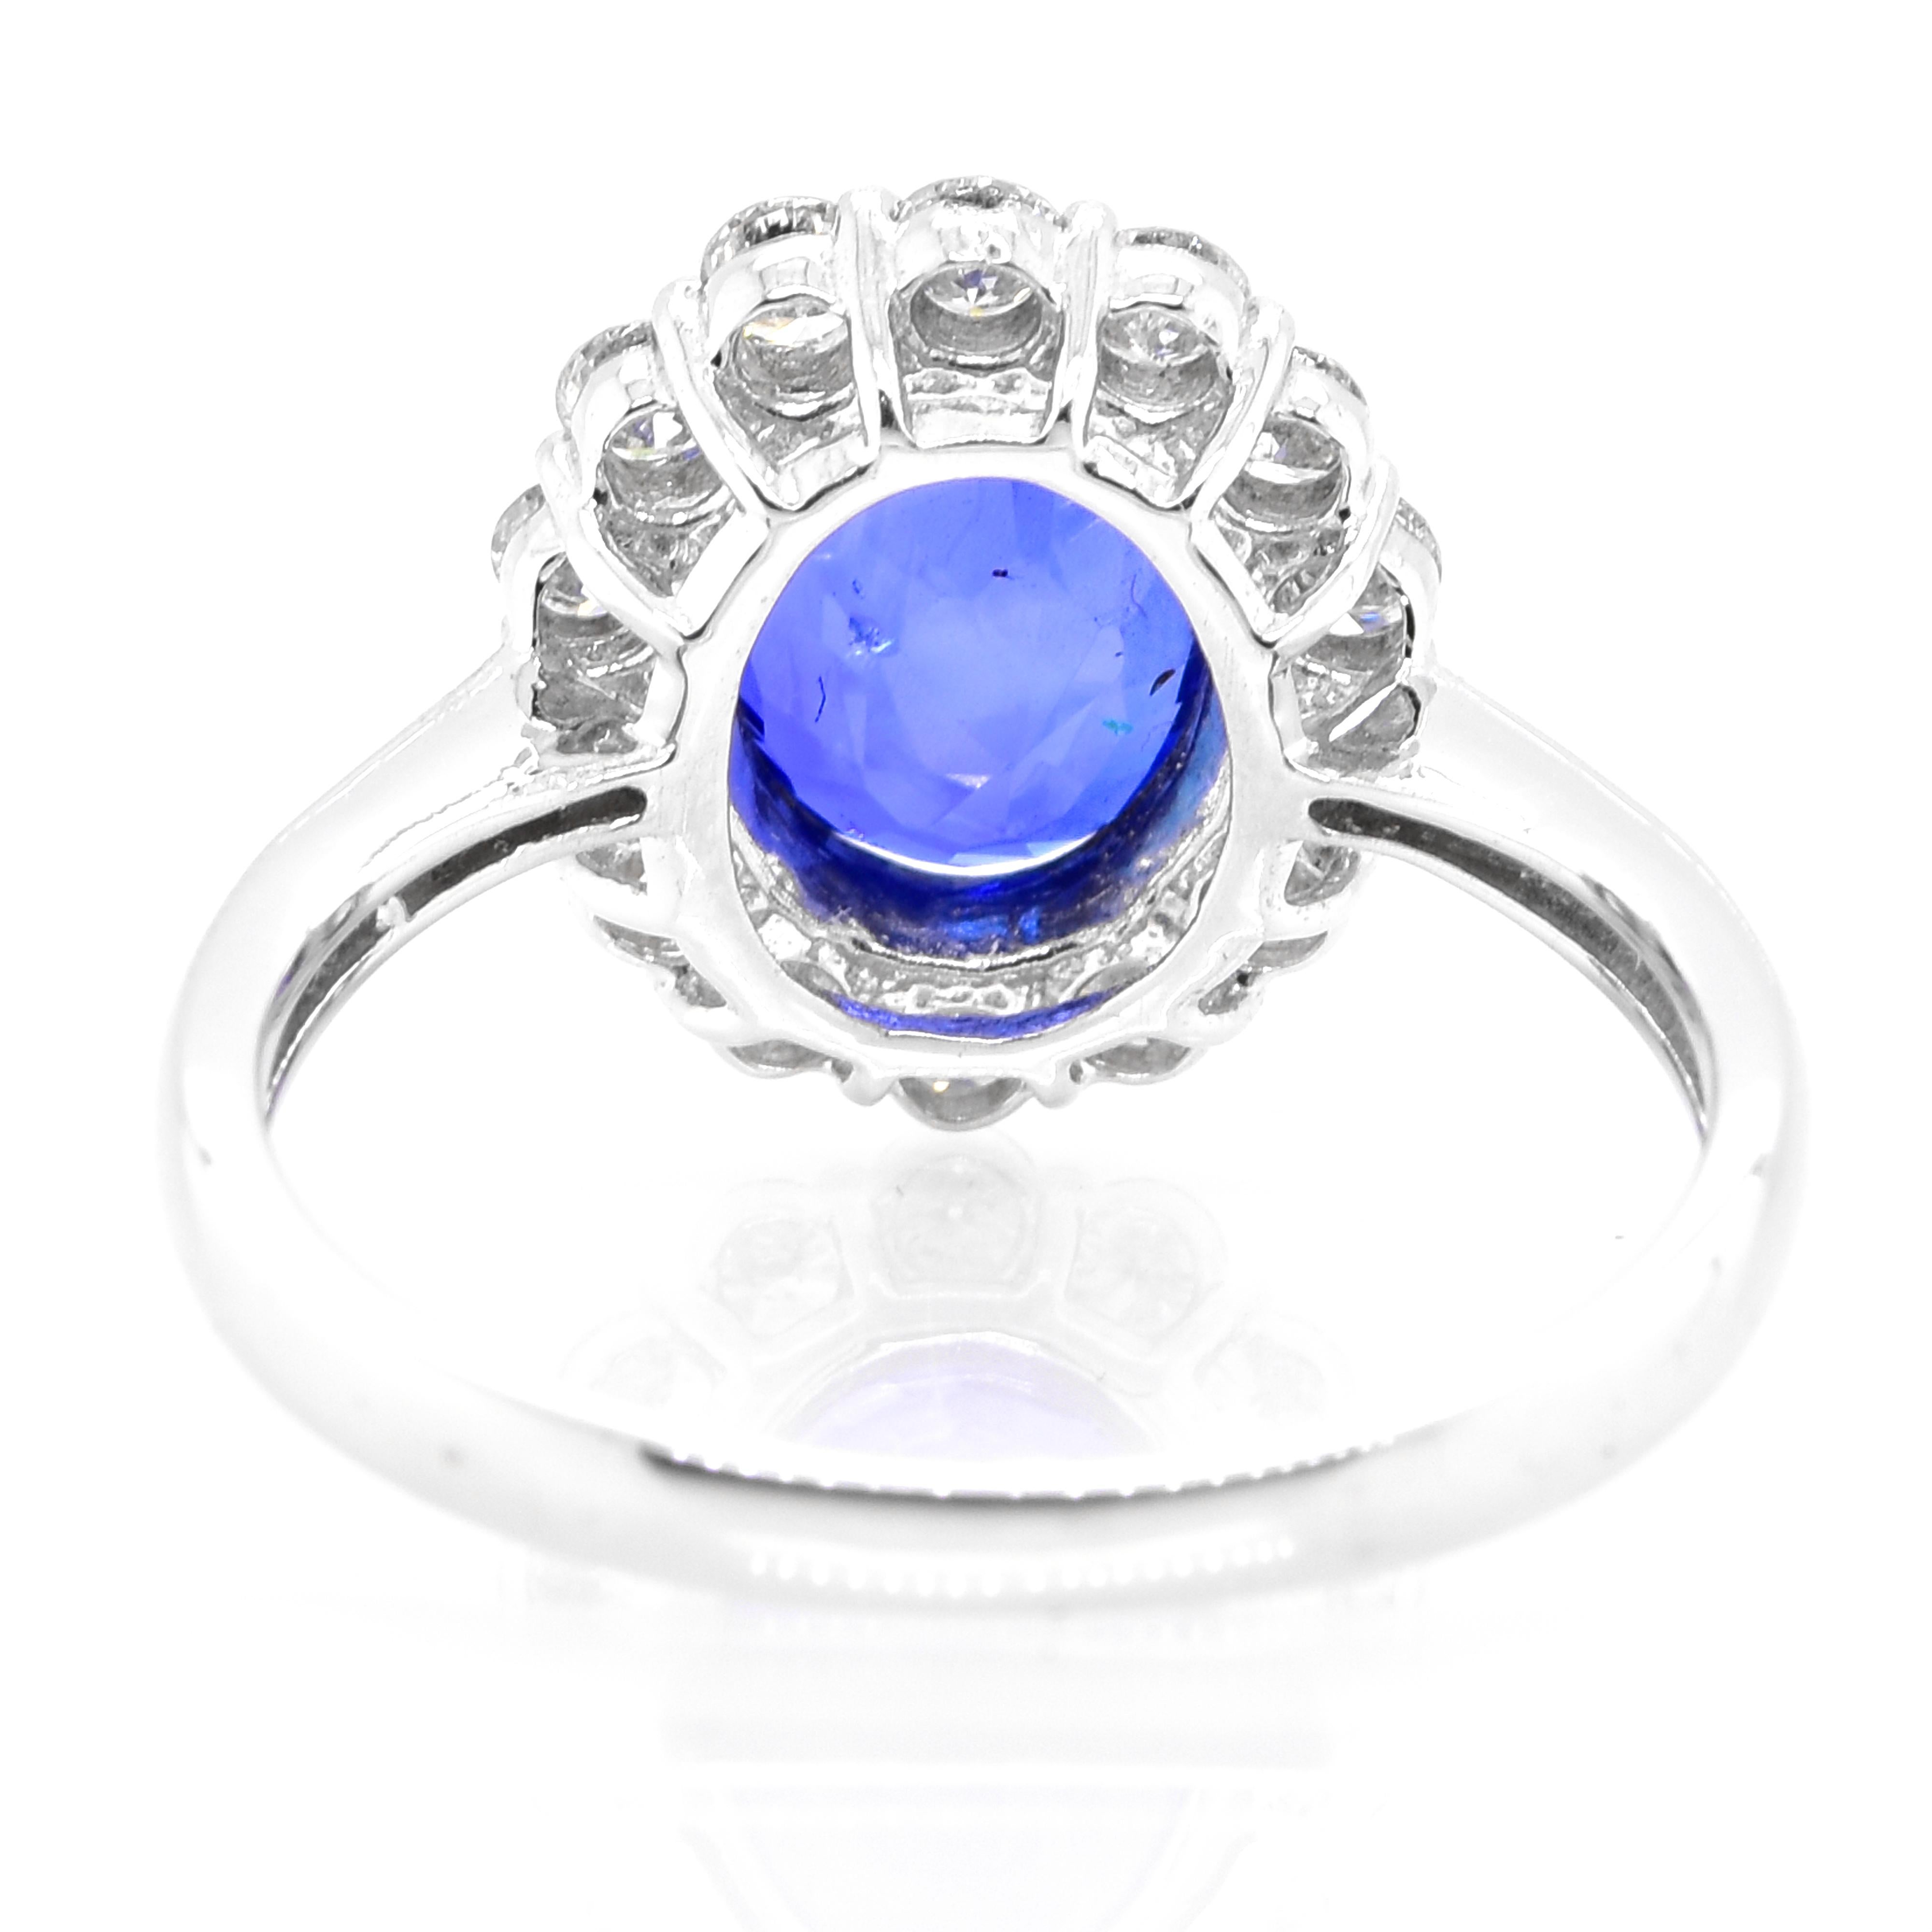 Women's 2.39 Carat Natural, Unheated, Ceylon Sapphire and Diamond Ring Made in Platinum For Sale